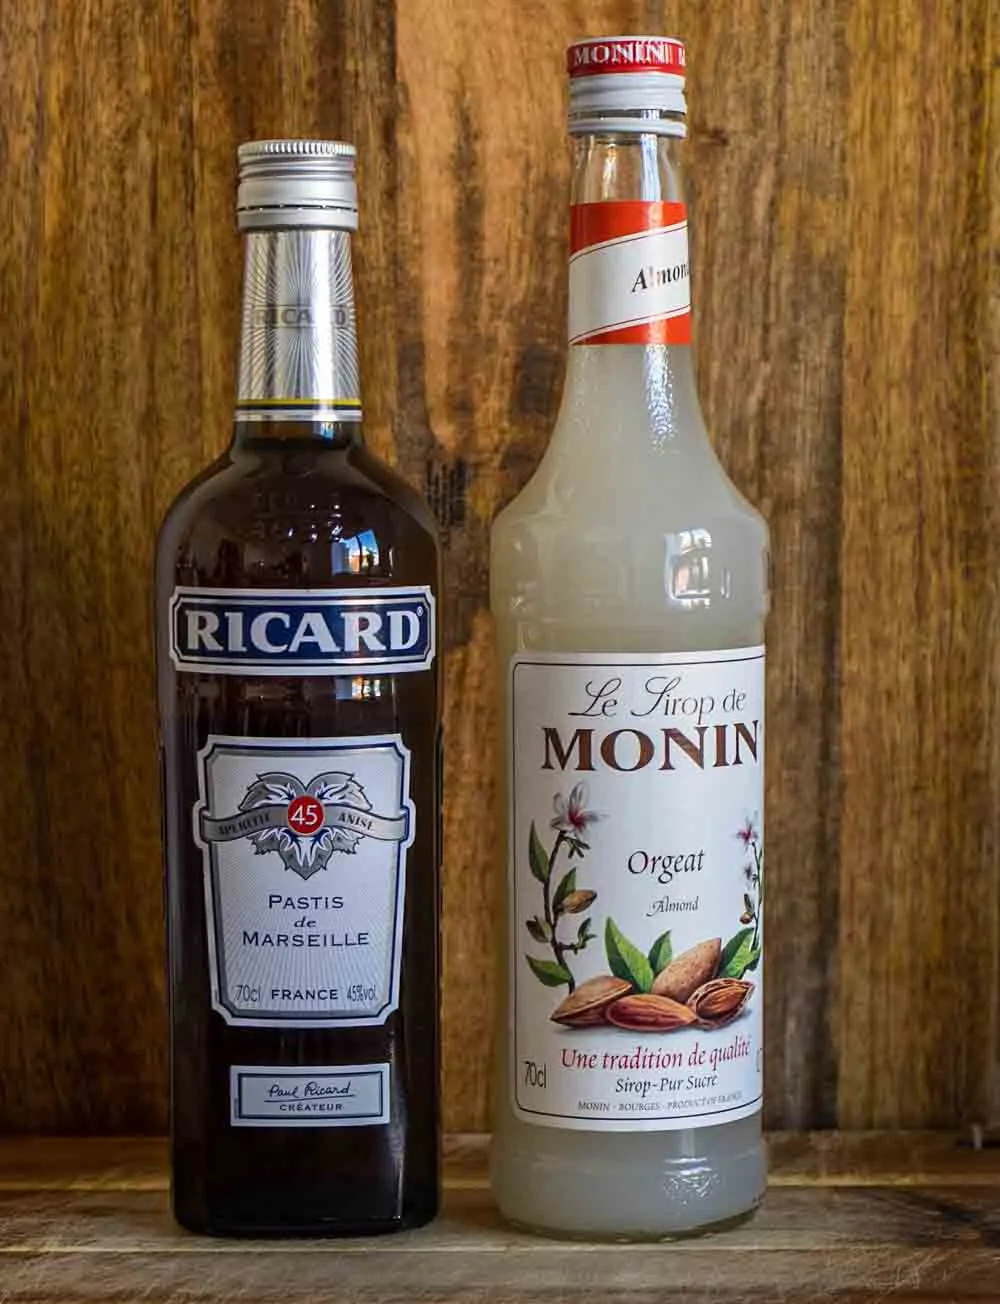 Bottles of Pastis and Orgeat